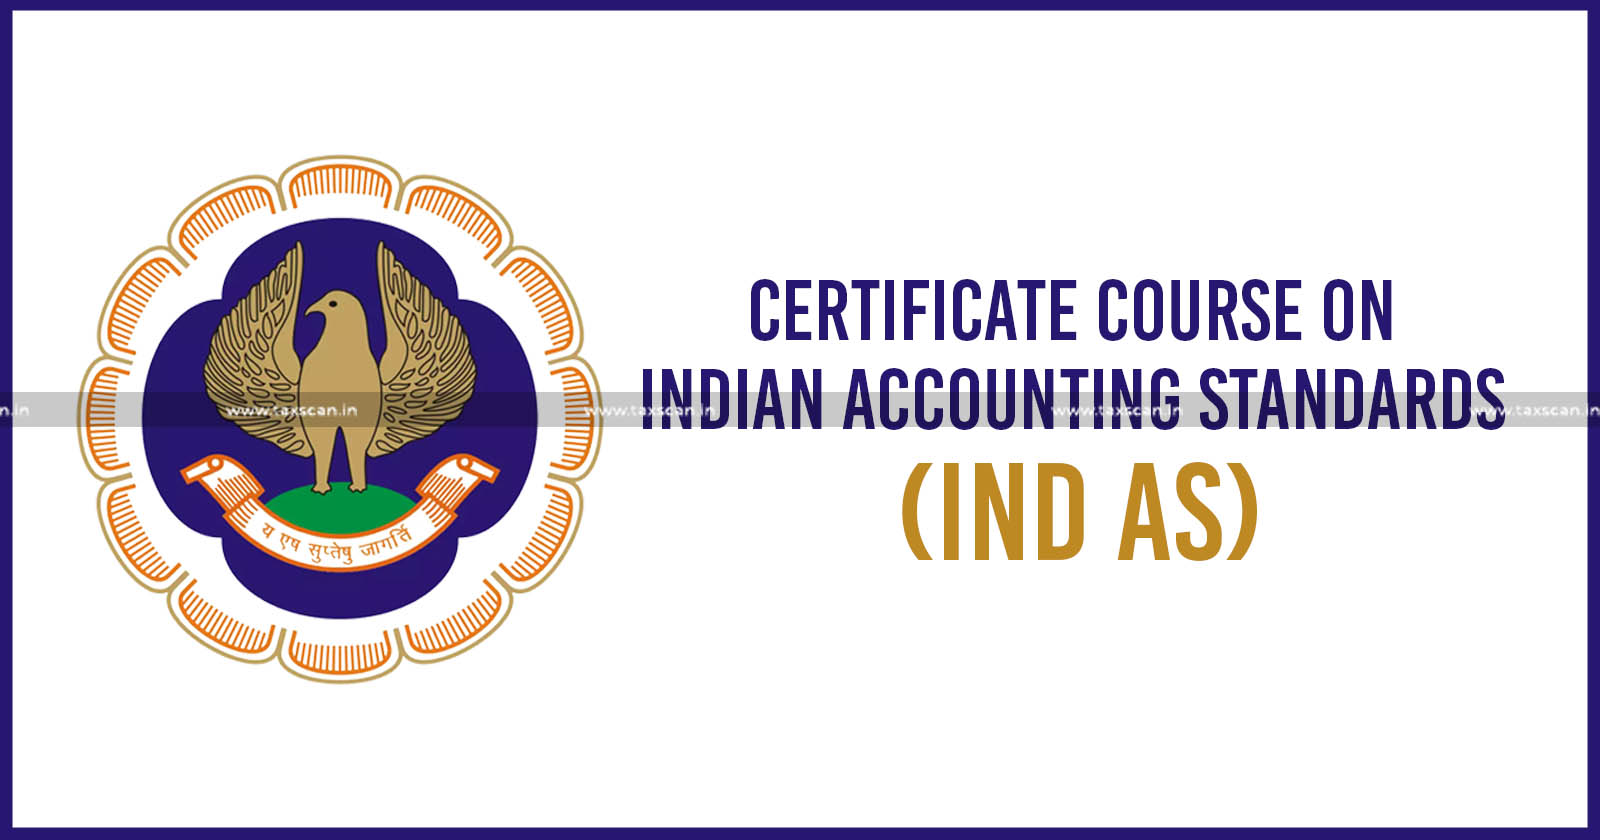 ICAI's Certificate Course on Indian Accounting Standards (Ind AS) commence - TAXSCAN